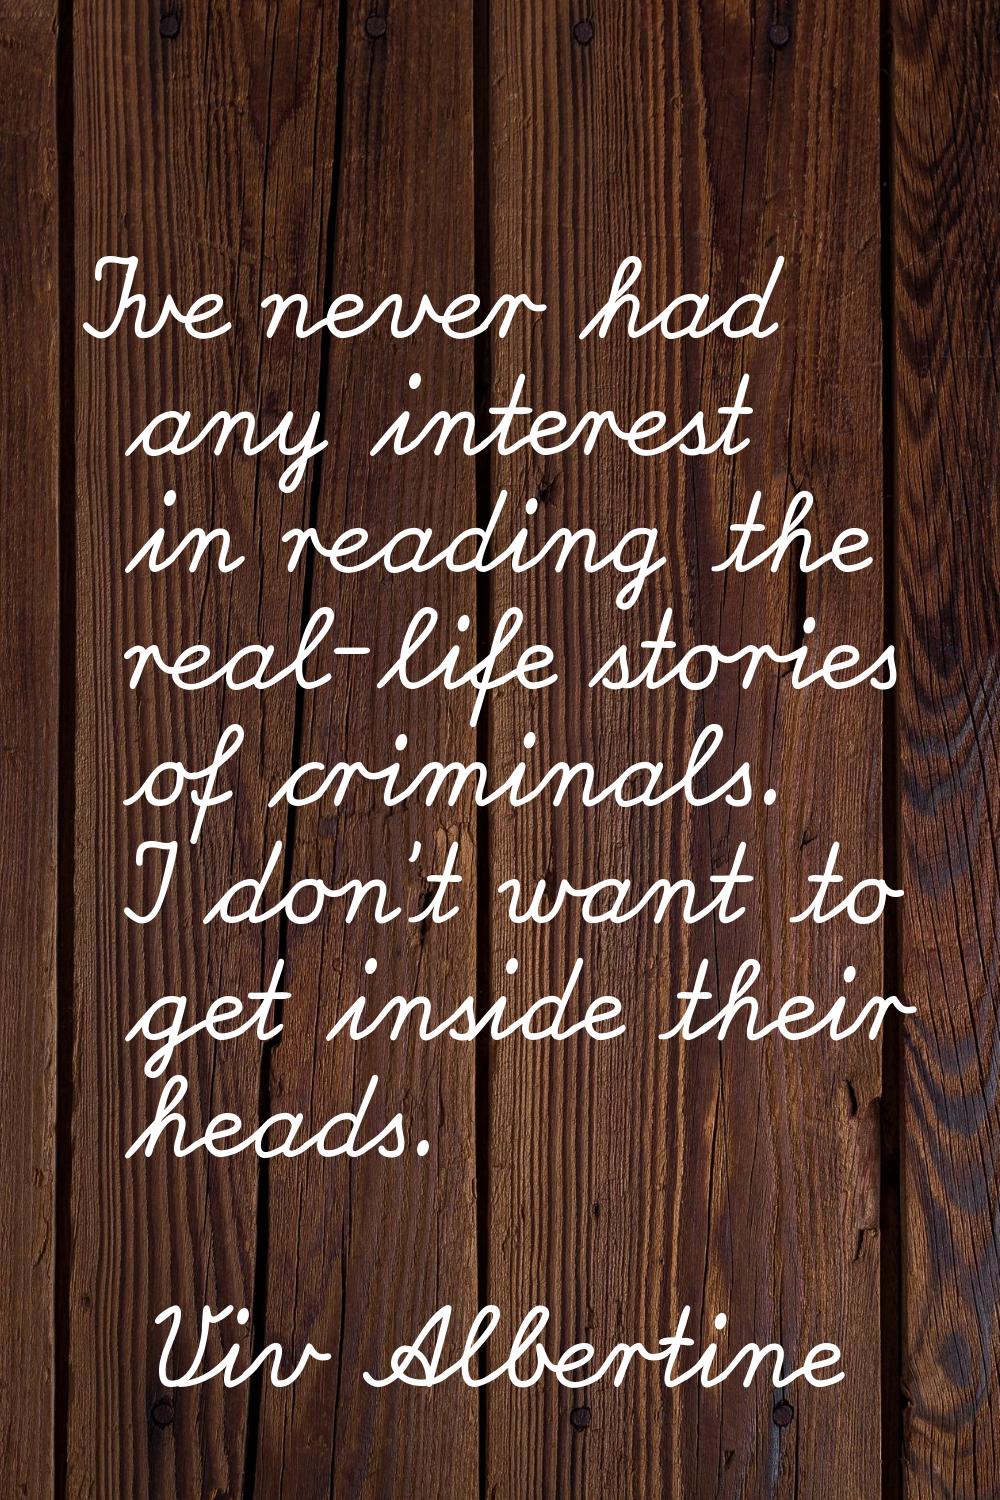 I've never had any interest in reading the real-life stories of criminals. I don't want to get insi